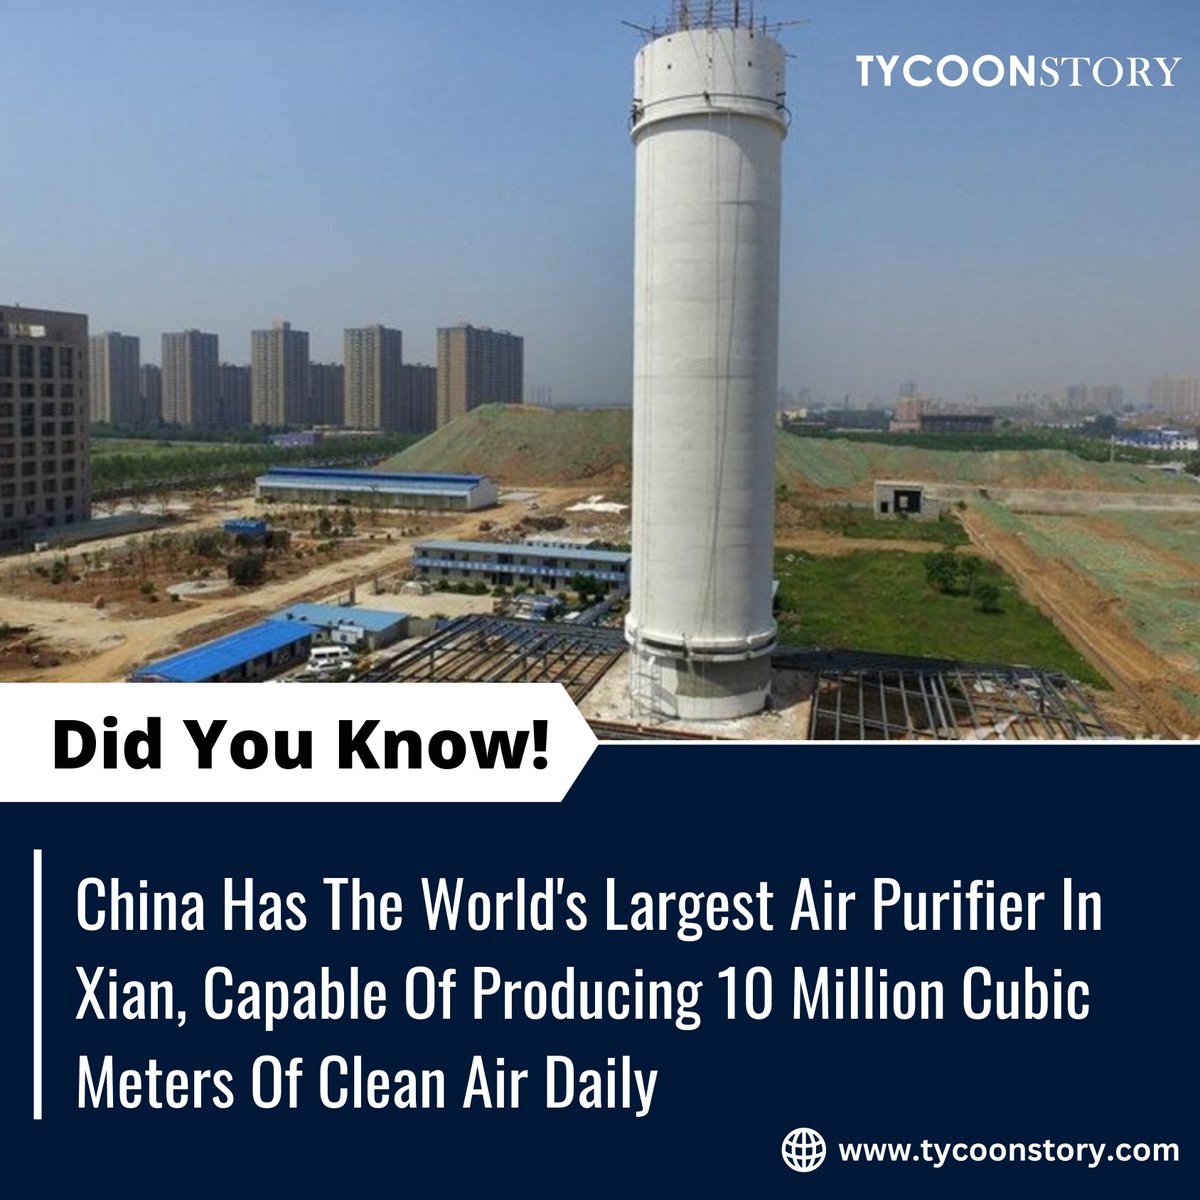 #didyouknow

#cleanair #xian #airpurifier #Innovations #airquality #Sustainability #greentechnology #engineeringmarvel #CleanAirInitiative #pollutioncontrol #publichealth #greeninfrastructure #urbandevelopment #ClimateAction

tycoonstory.com